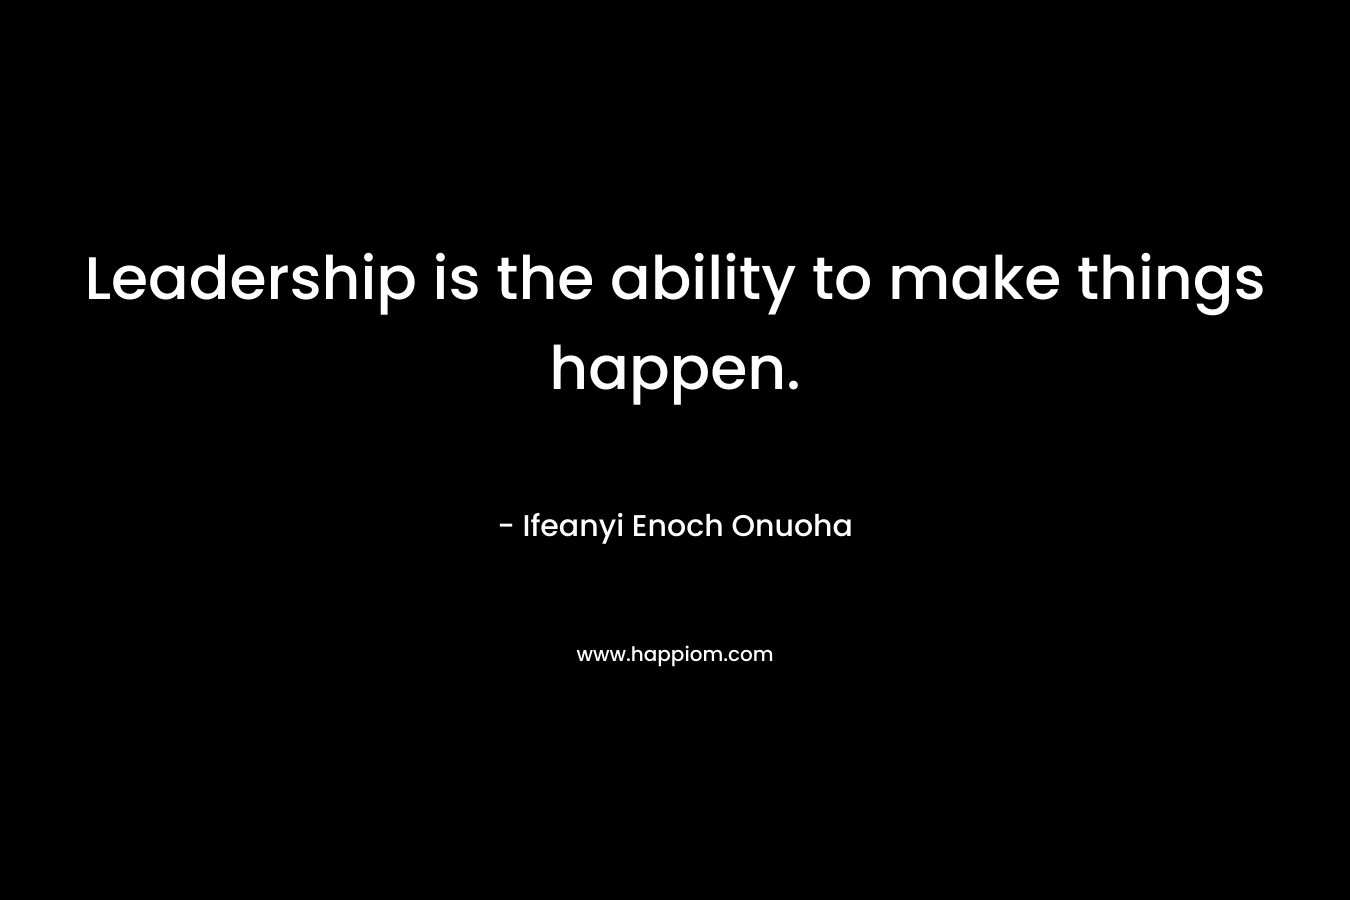 Leadership is the ability to make things happen.